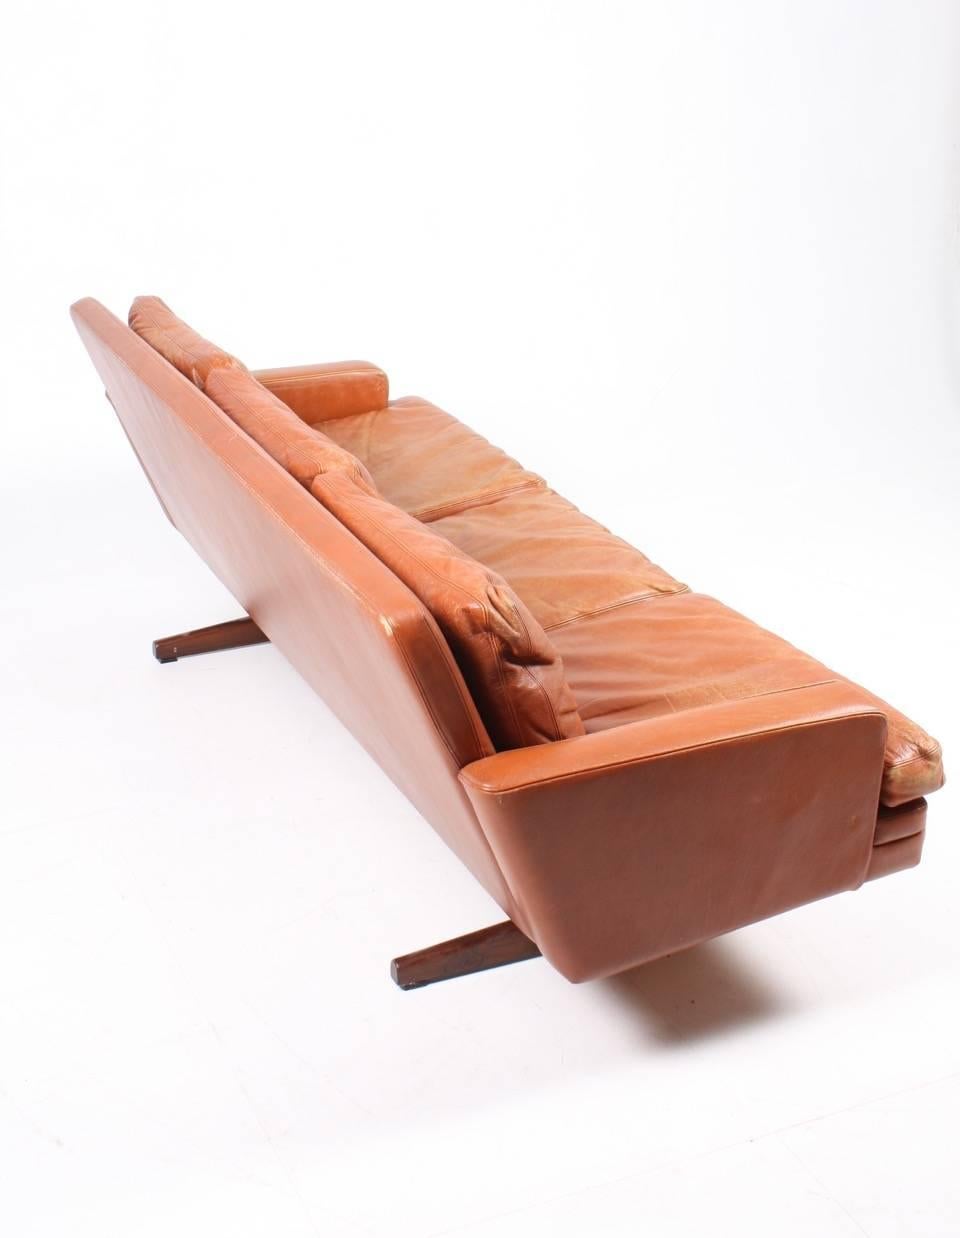 Norwegian Sofa in Patinated Leather by Fredrik Kayser